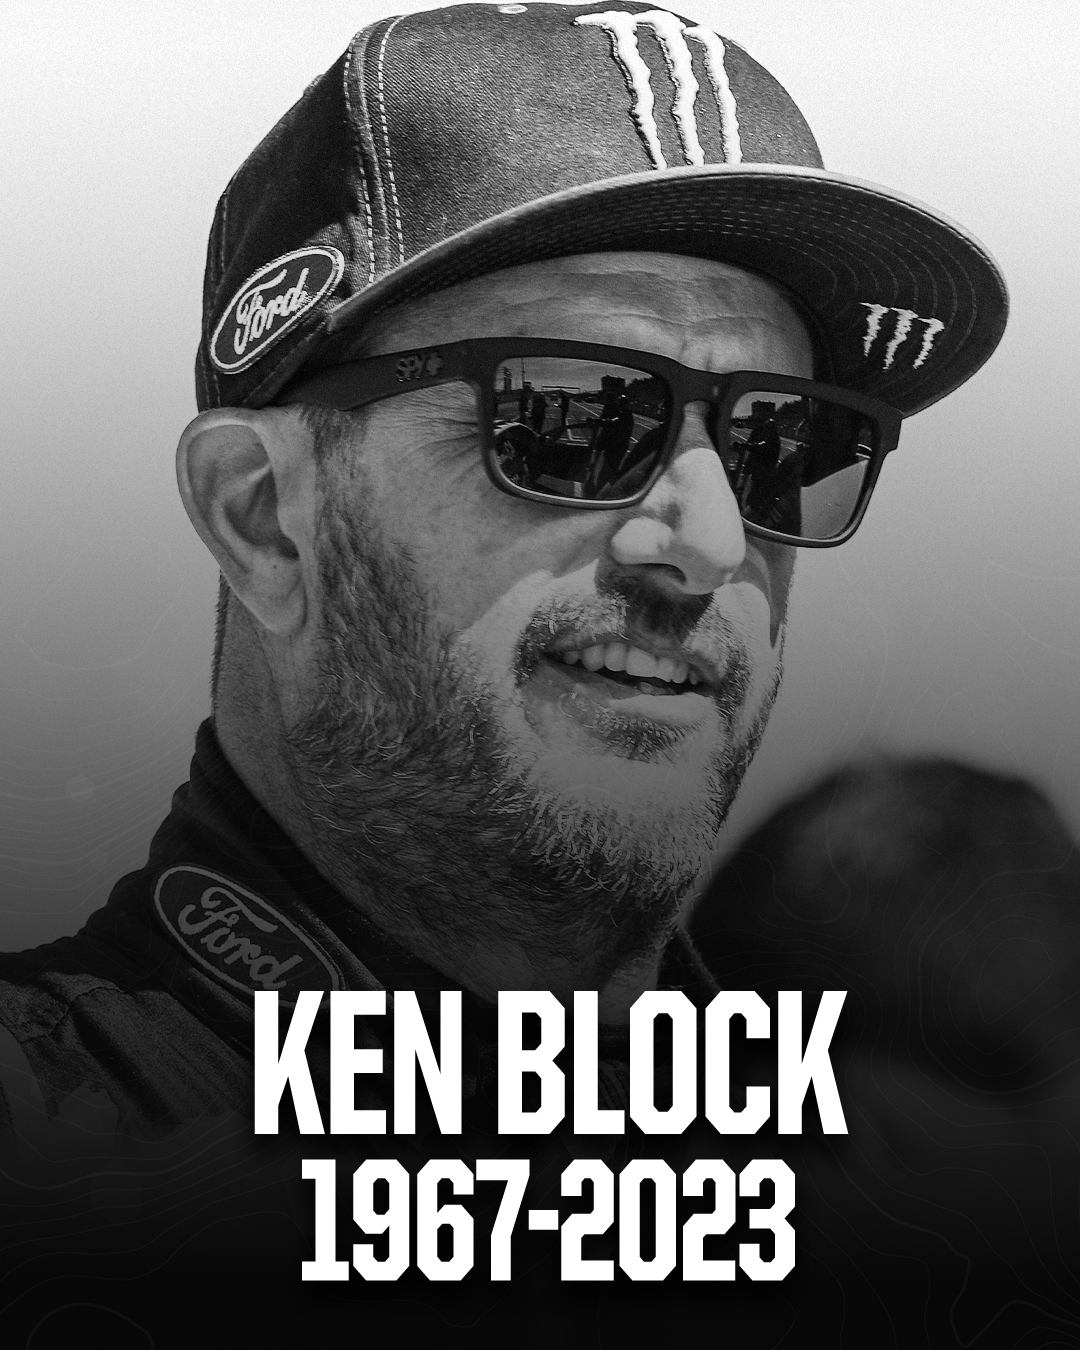 US Rally Driver, YouTube Star Ken Block Dies In Snowmobile Accident